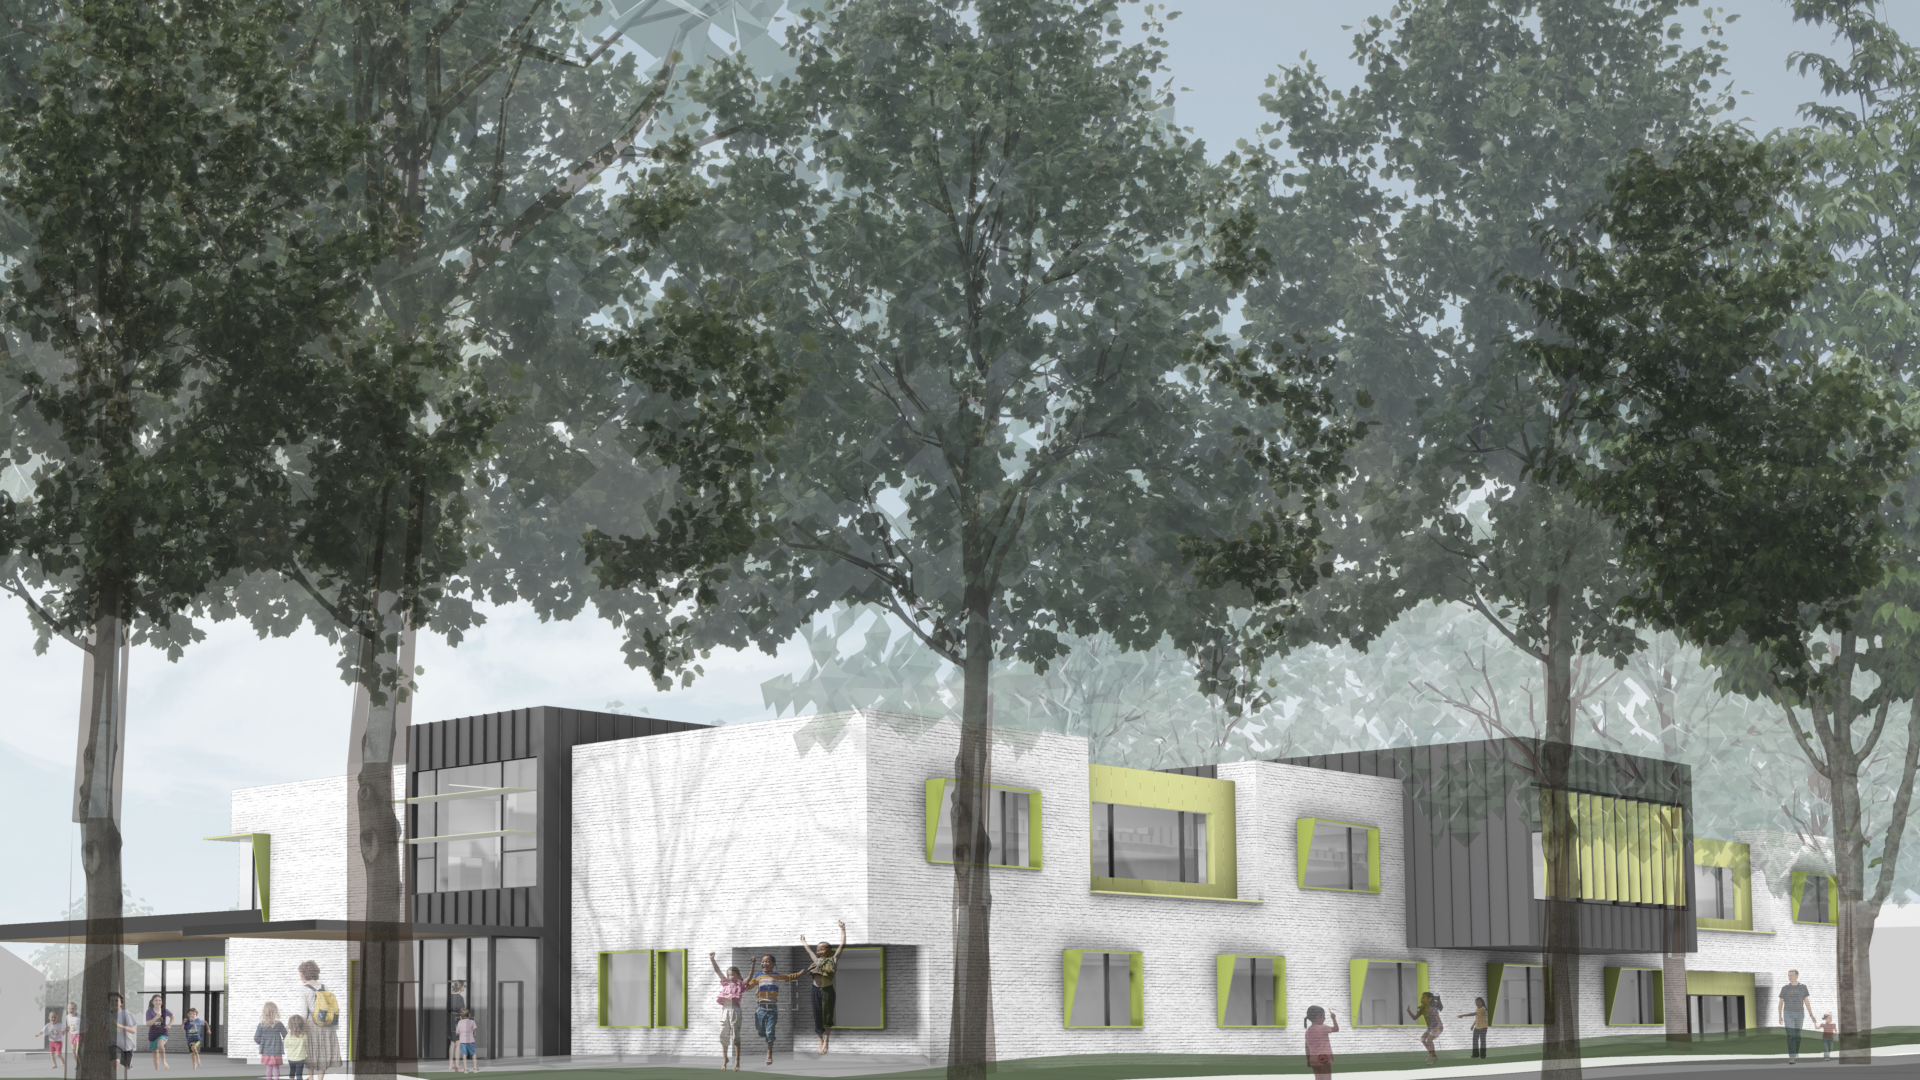 Rendering of Bayview Elementary School made from cross-laminated timber (CLT) panels